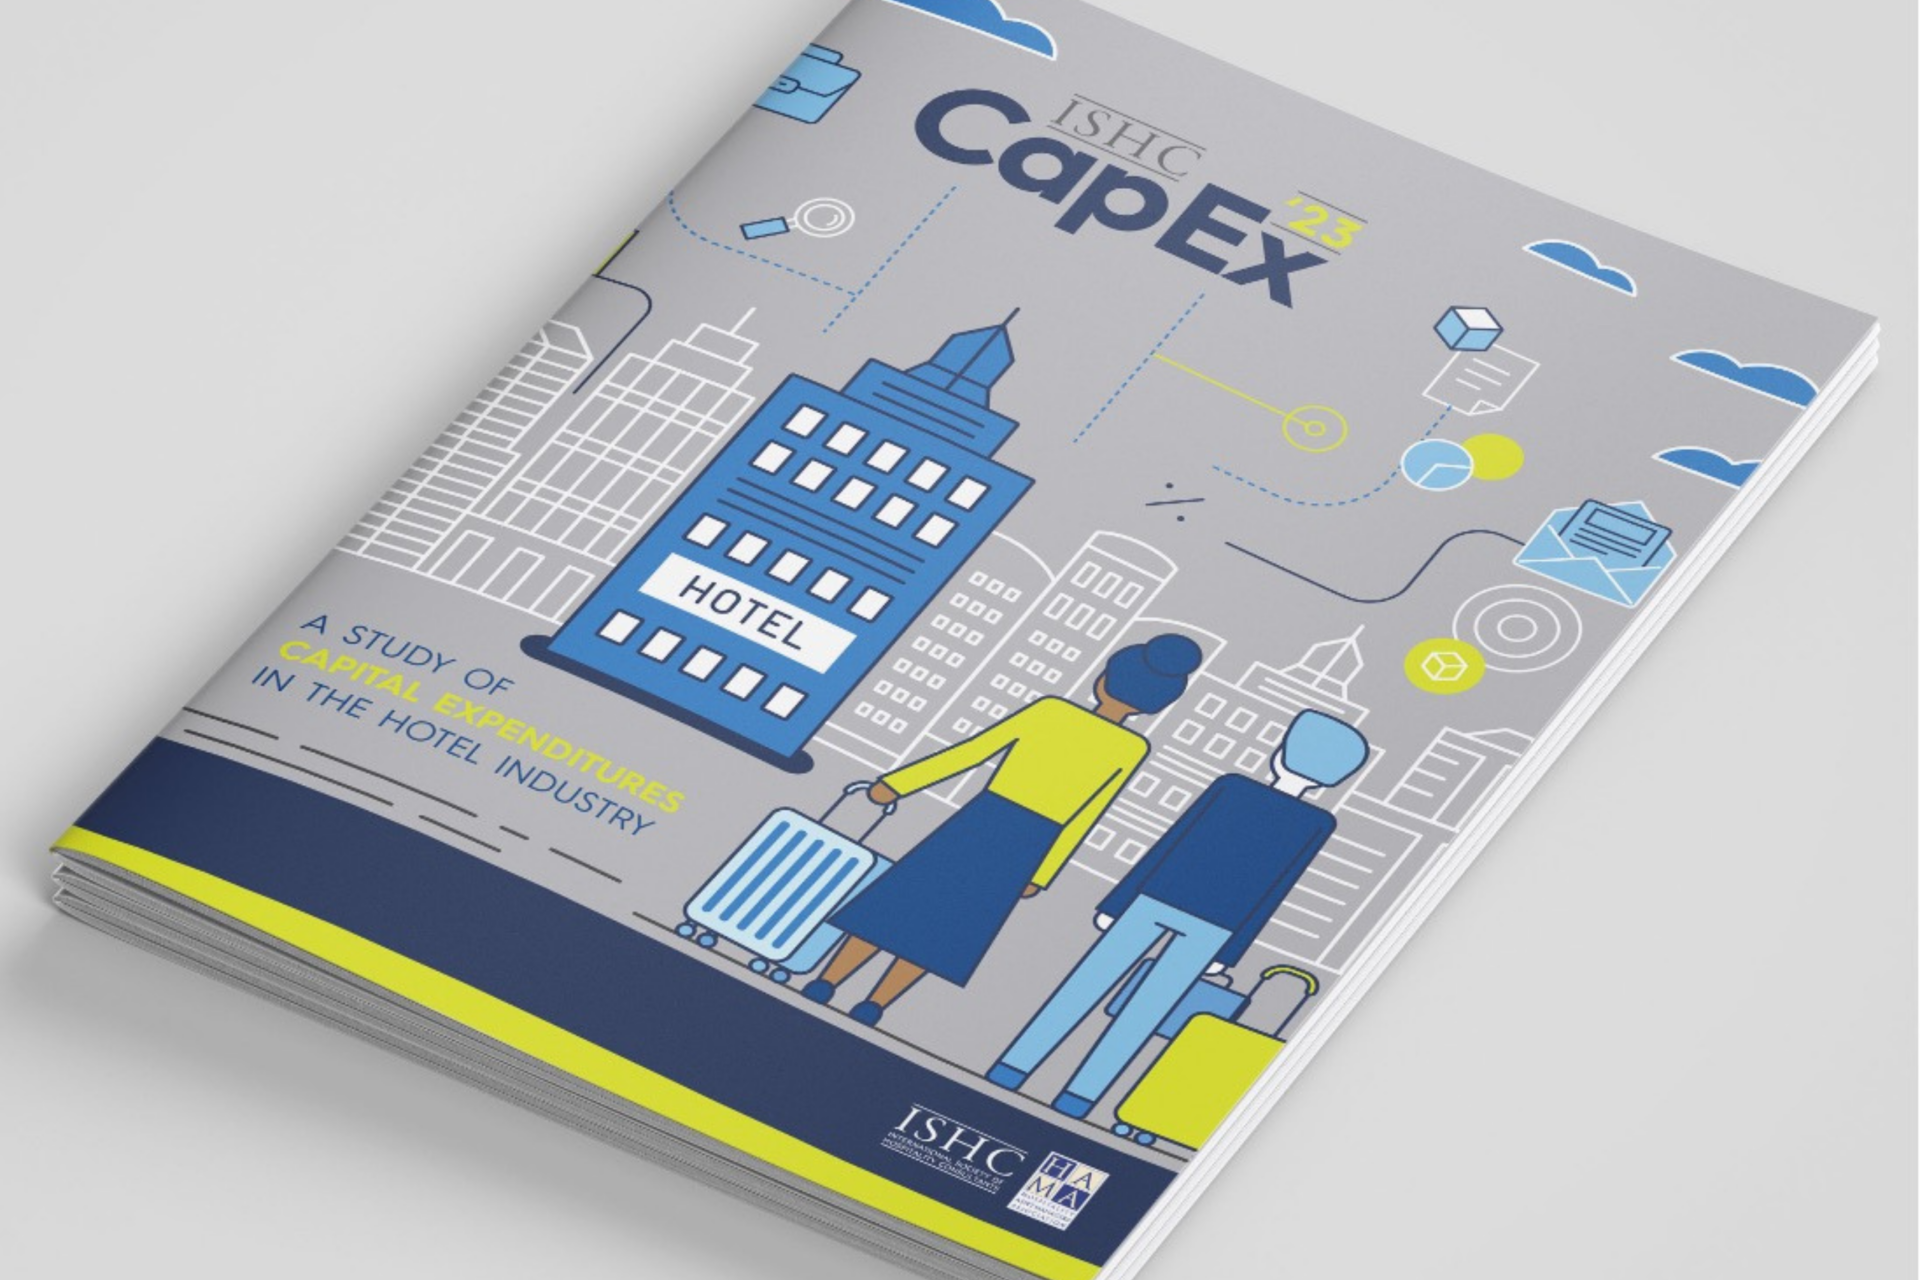 ISHC Debuts CapEx 2023: A Study of Capital Expenditures in the Hotel Industry